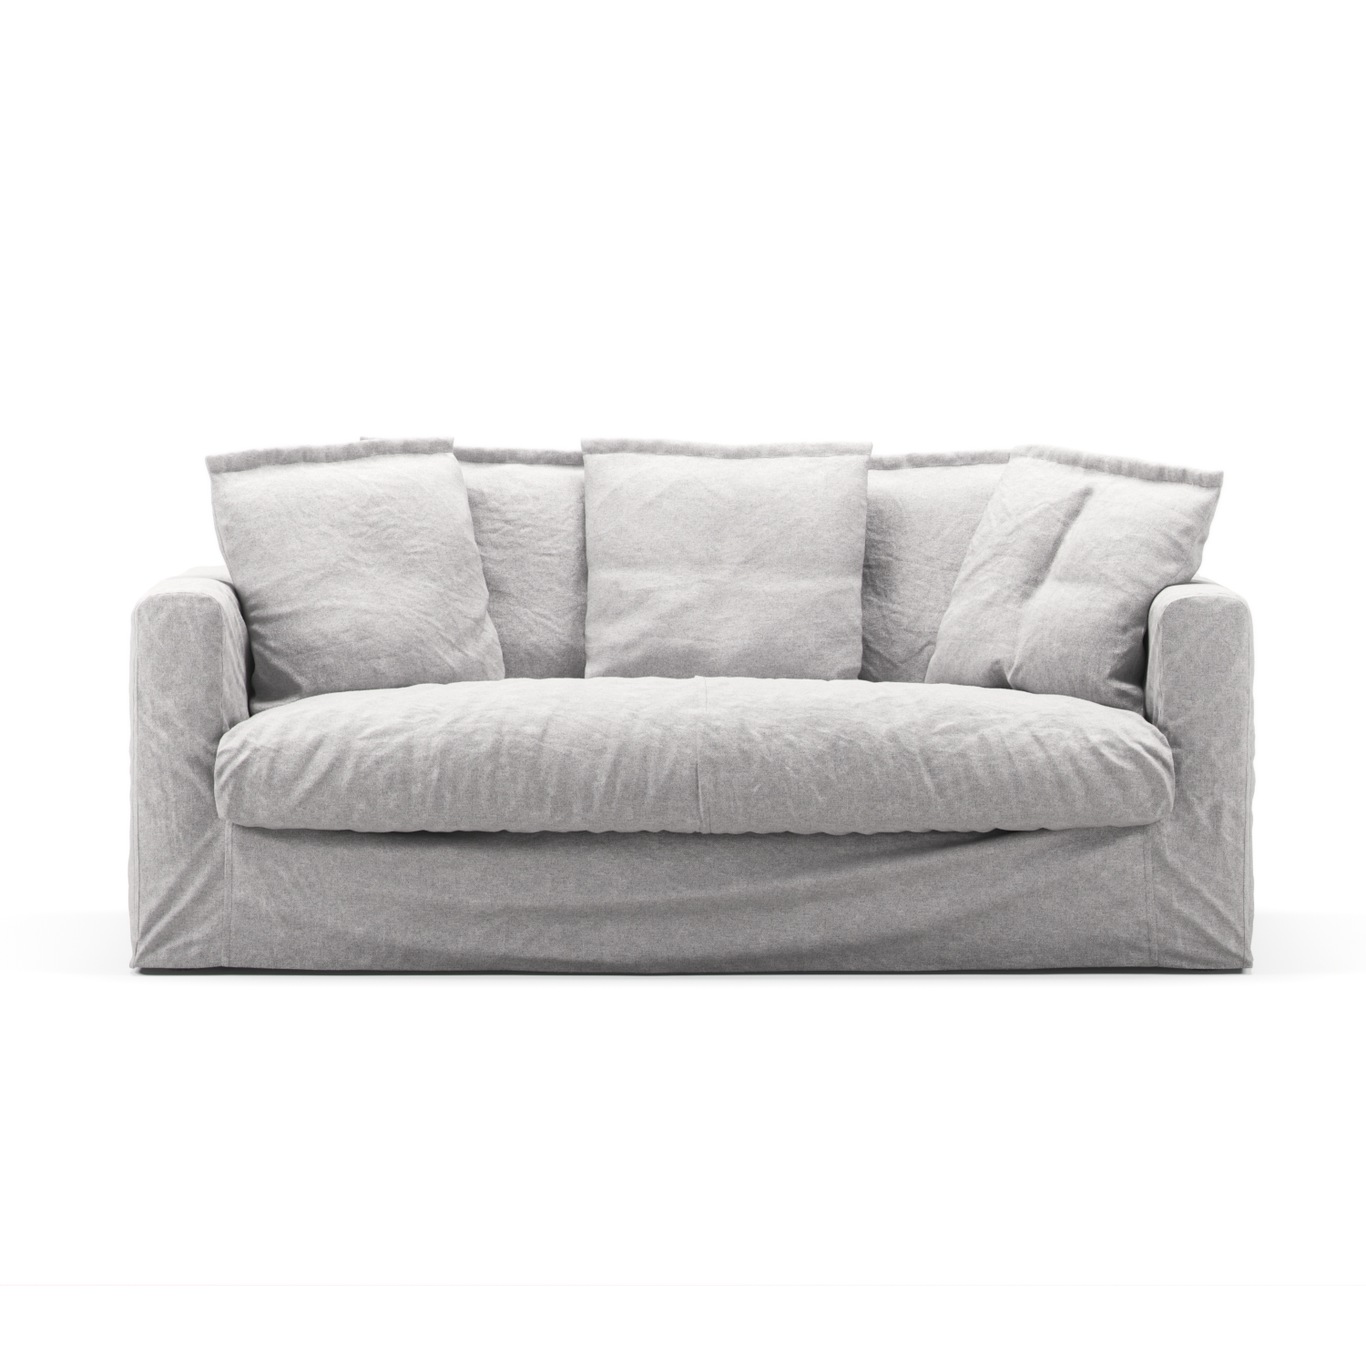 Le Grand Air Upholstery 2-Seater Linen, Misty Grey